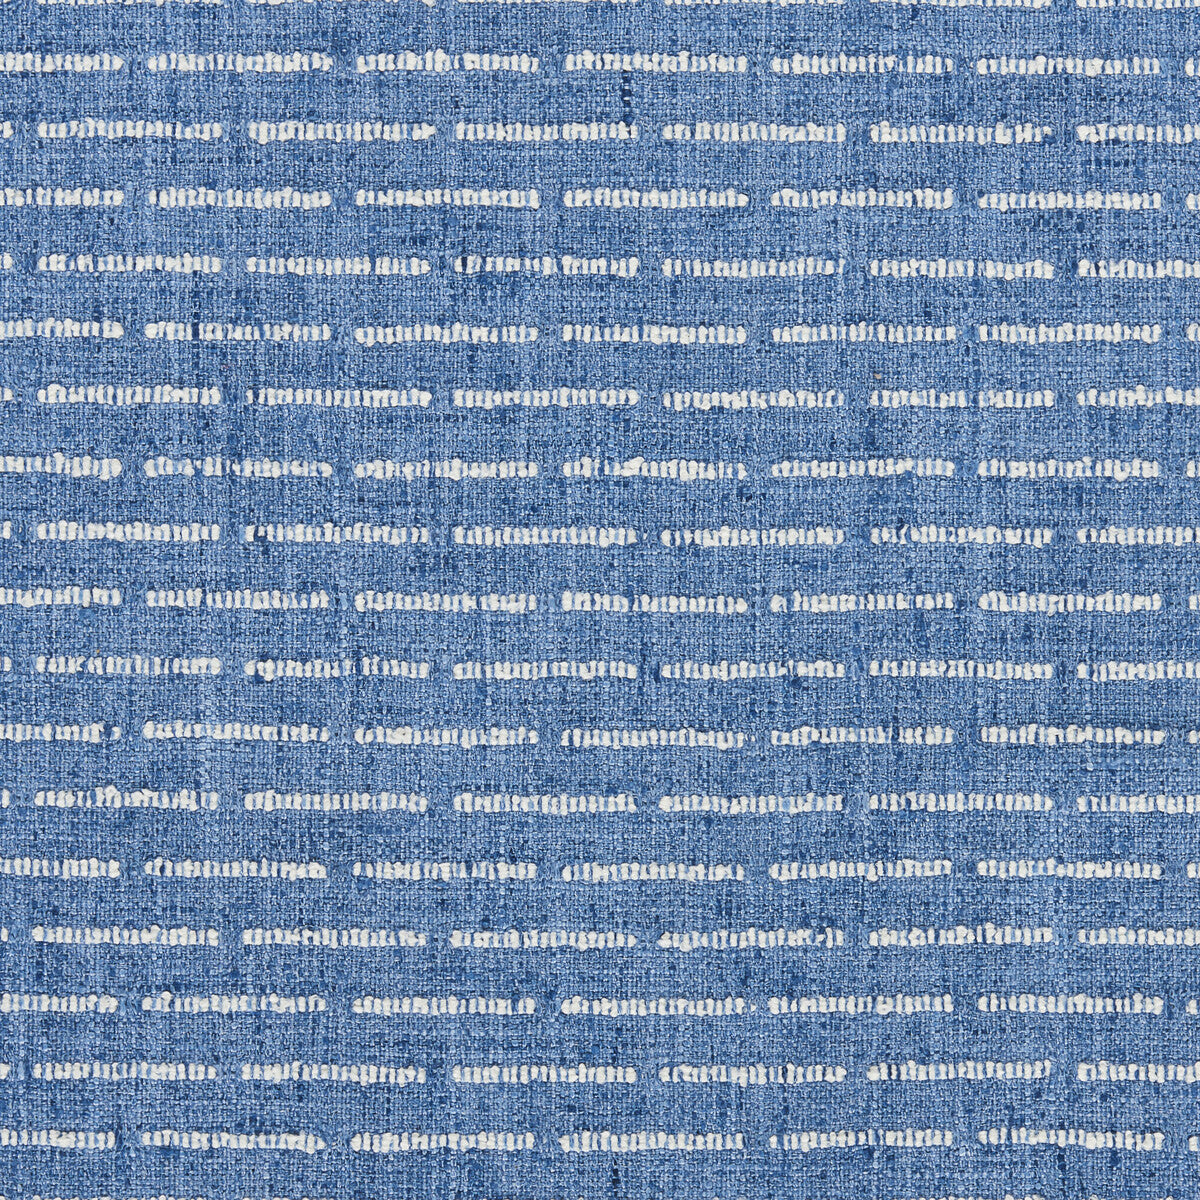 Kravet Basics fabric in 36528-15 color - pattern 36528.15.0 - by Kravet Basics in the Bungalow Chic II collection